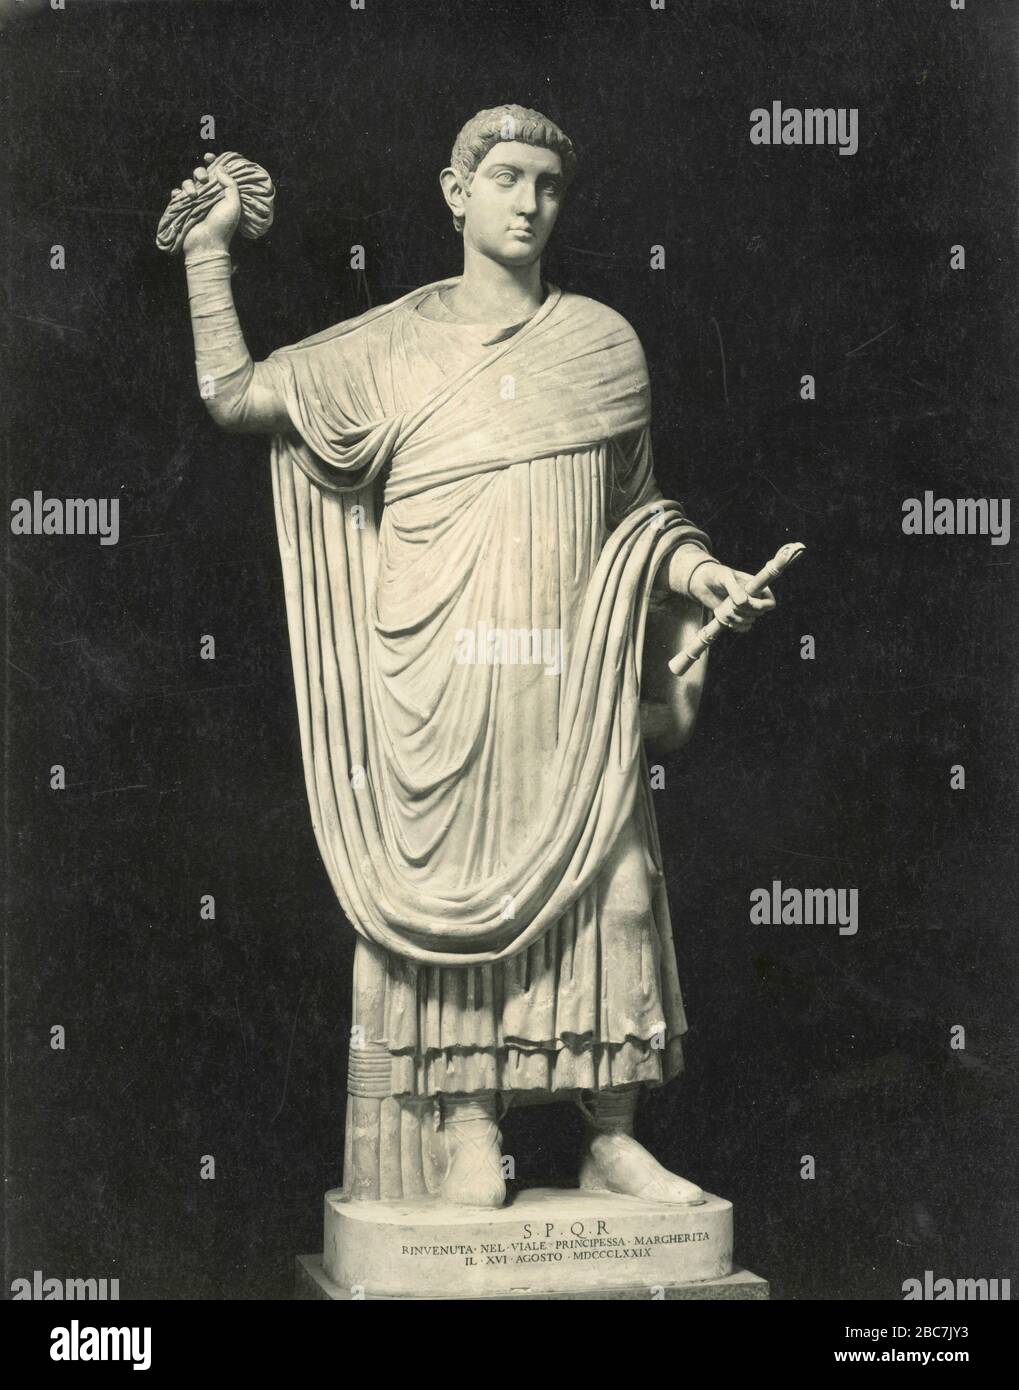 Aedile son, ancient marble sculpture, Conservatori Palace, Rome, Italy 1920s Stock Photo